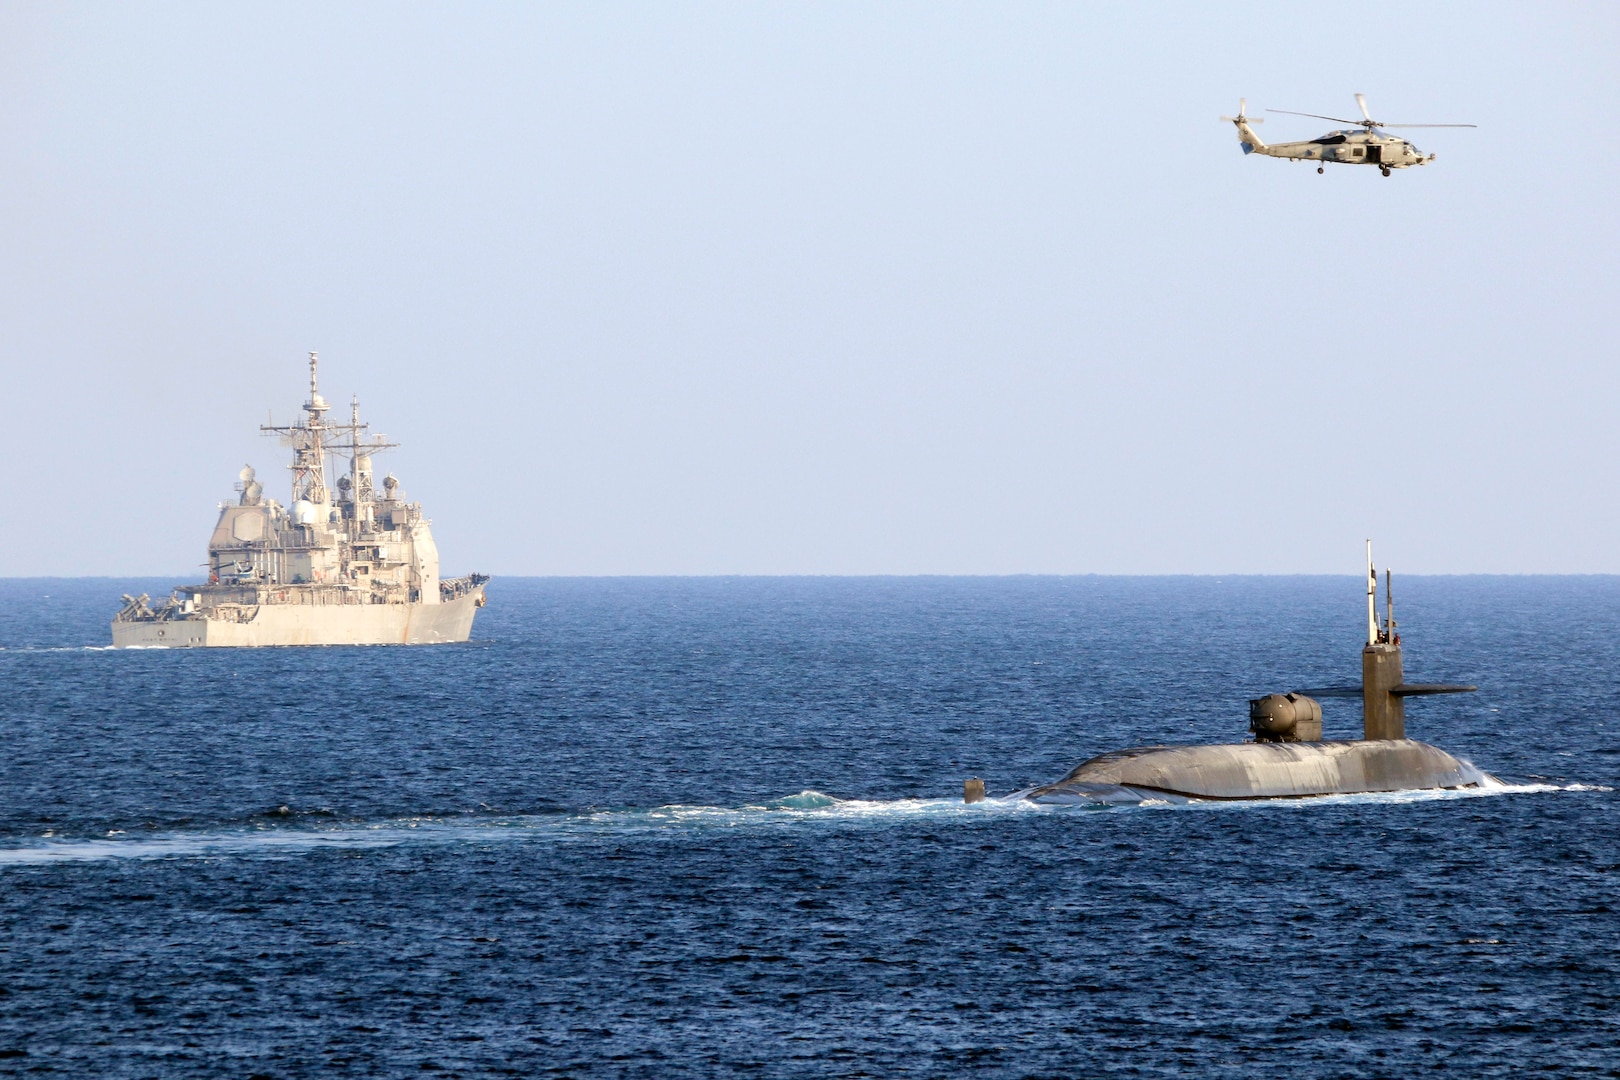 The guided-missile submarine USS Georgia (SSGN 729), right, transits the Strait of Hormuz with the guided-missile cruiser USS Port Royal (CG 73), the guided-missile cruiser USS Philippine Sea (CG 58), not pictured, and a MH-60R Sea Hawk helicopter, attached to Helicopter Maritime Strike Squadron (HSM) 48, Dec. 21. Georgia is deployed to the U.S. 5th Fleet area of operations in support of naval operations to ensure maritime stability and security in the Central Region, connecting the Mediterranean and Pacific through the Western Indian Ocean and three critical chokepoints to the free flow of global commerce.